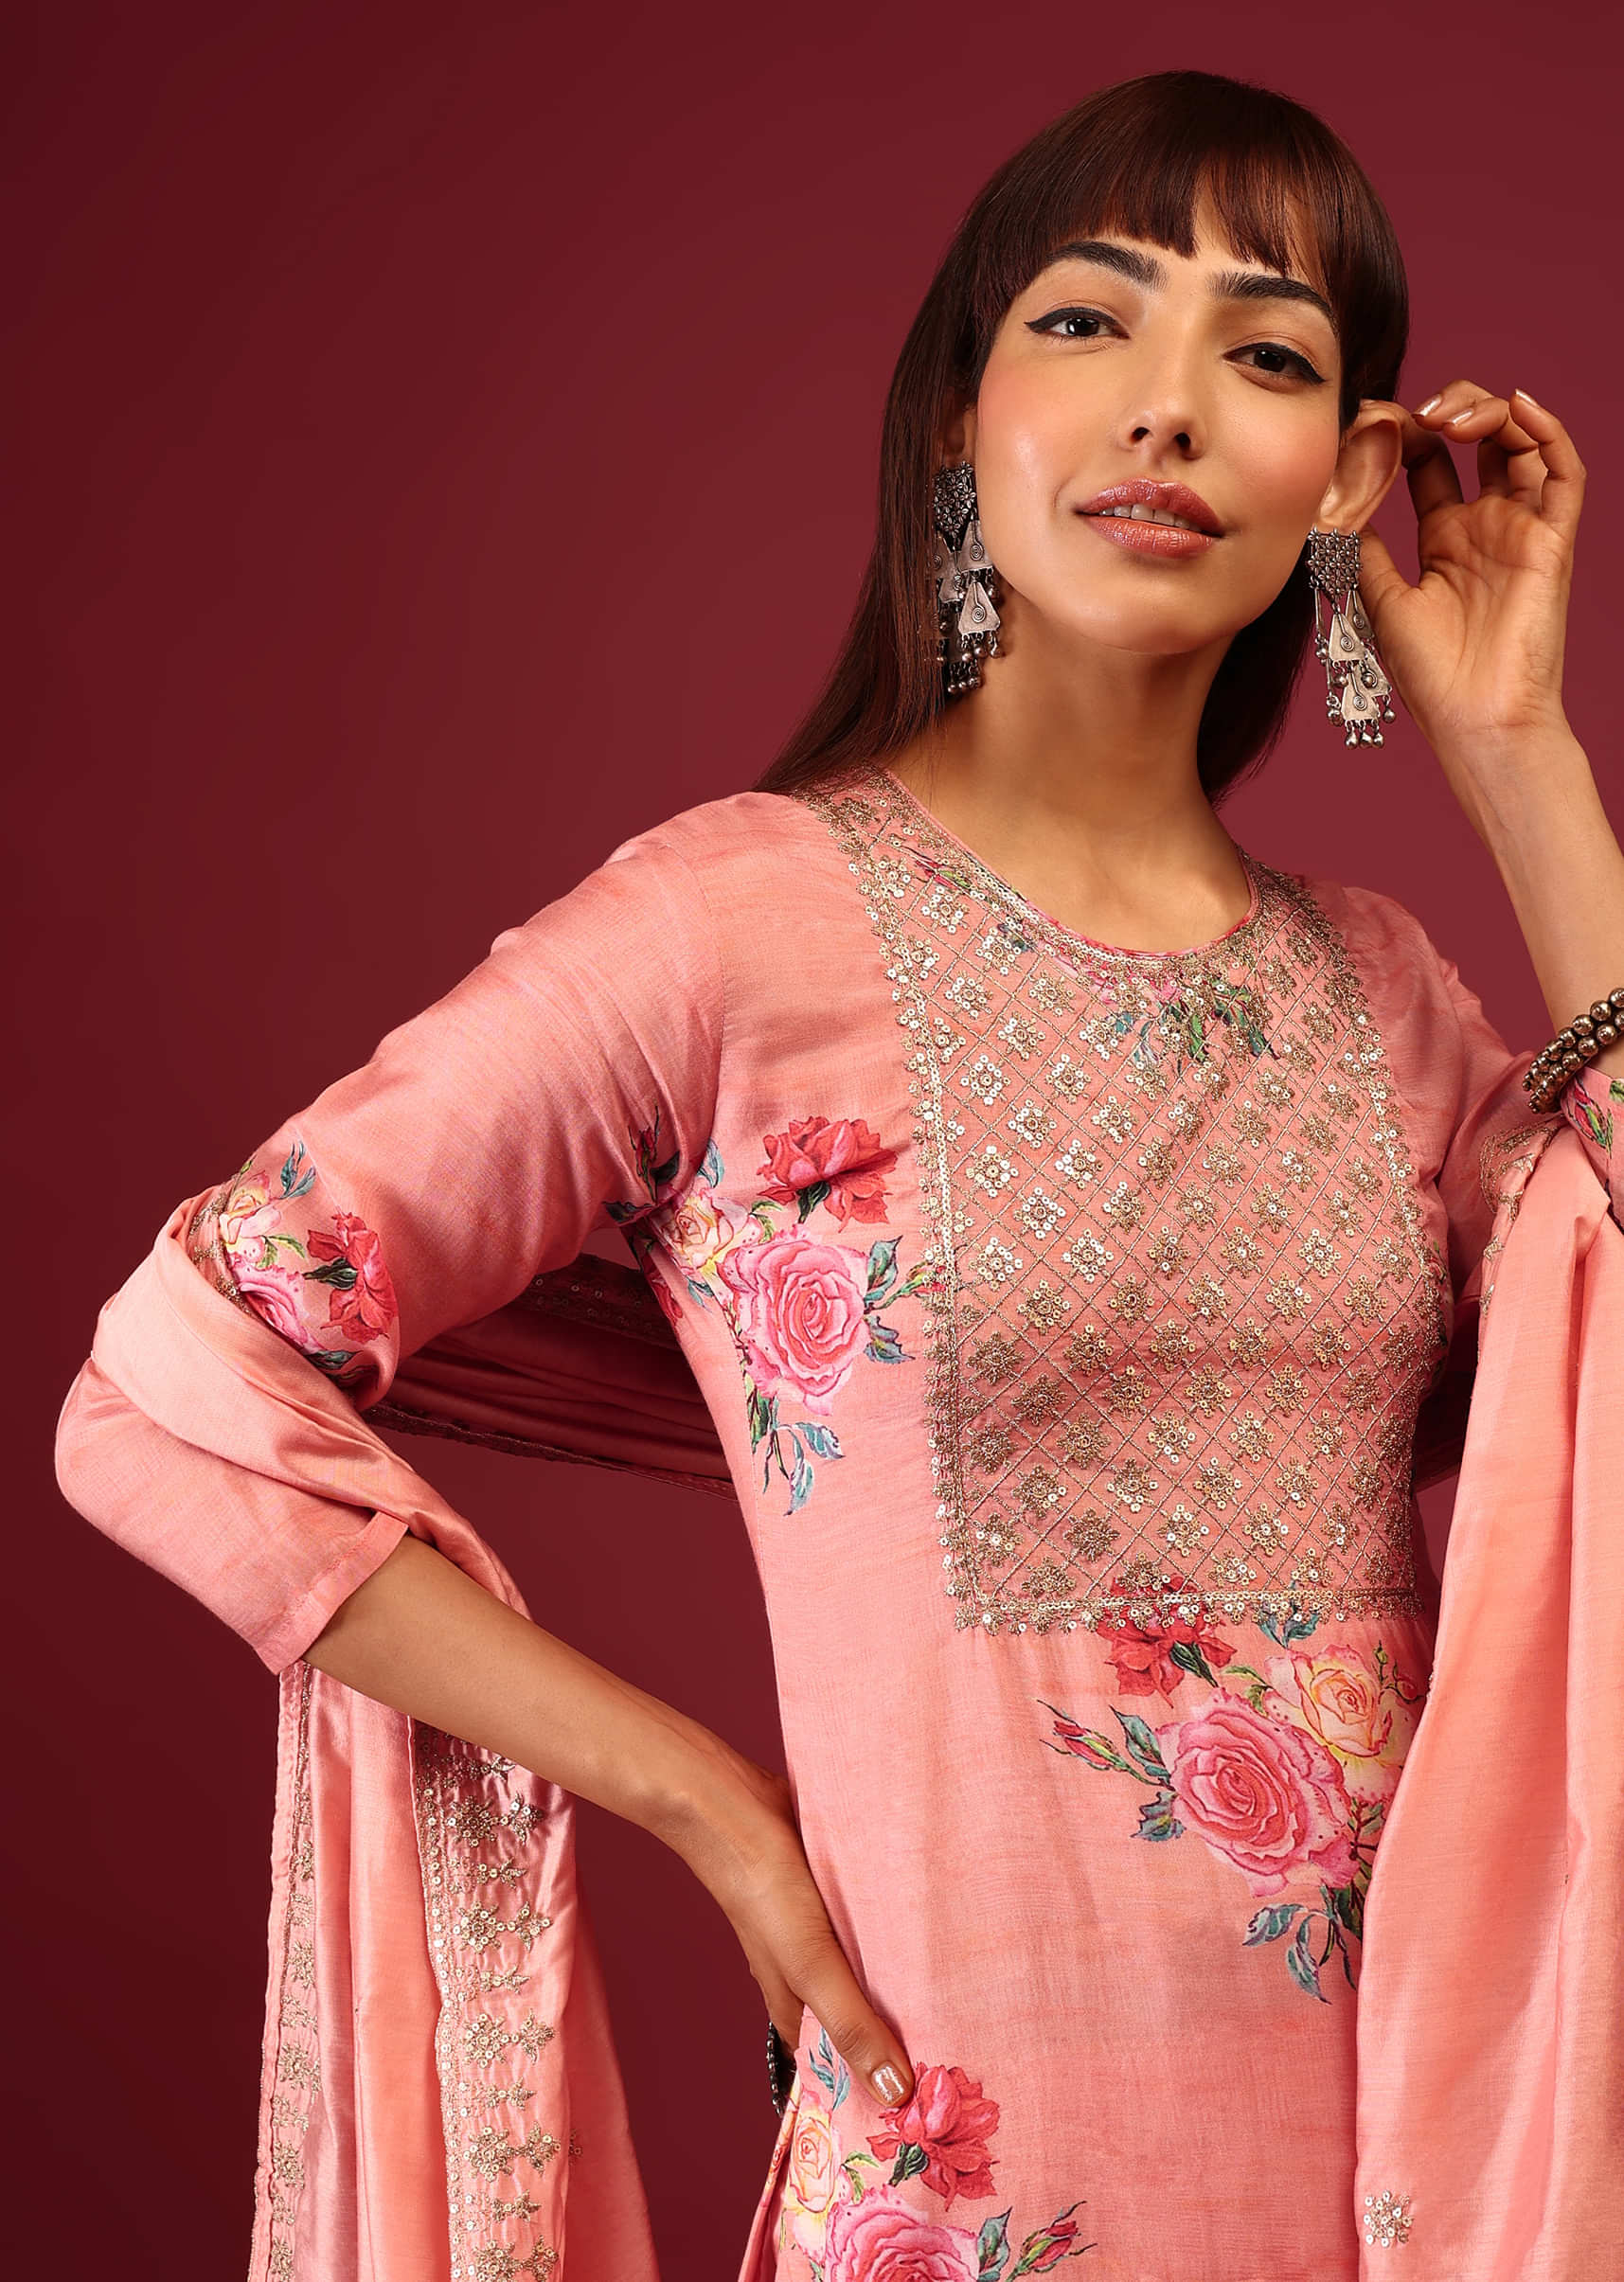 Salmon Pink Floral Print Pant Suit In U Neckline And Zari & Sequin Embroidery